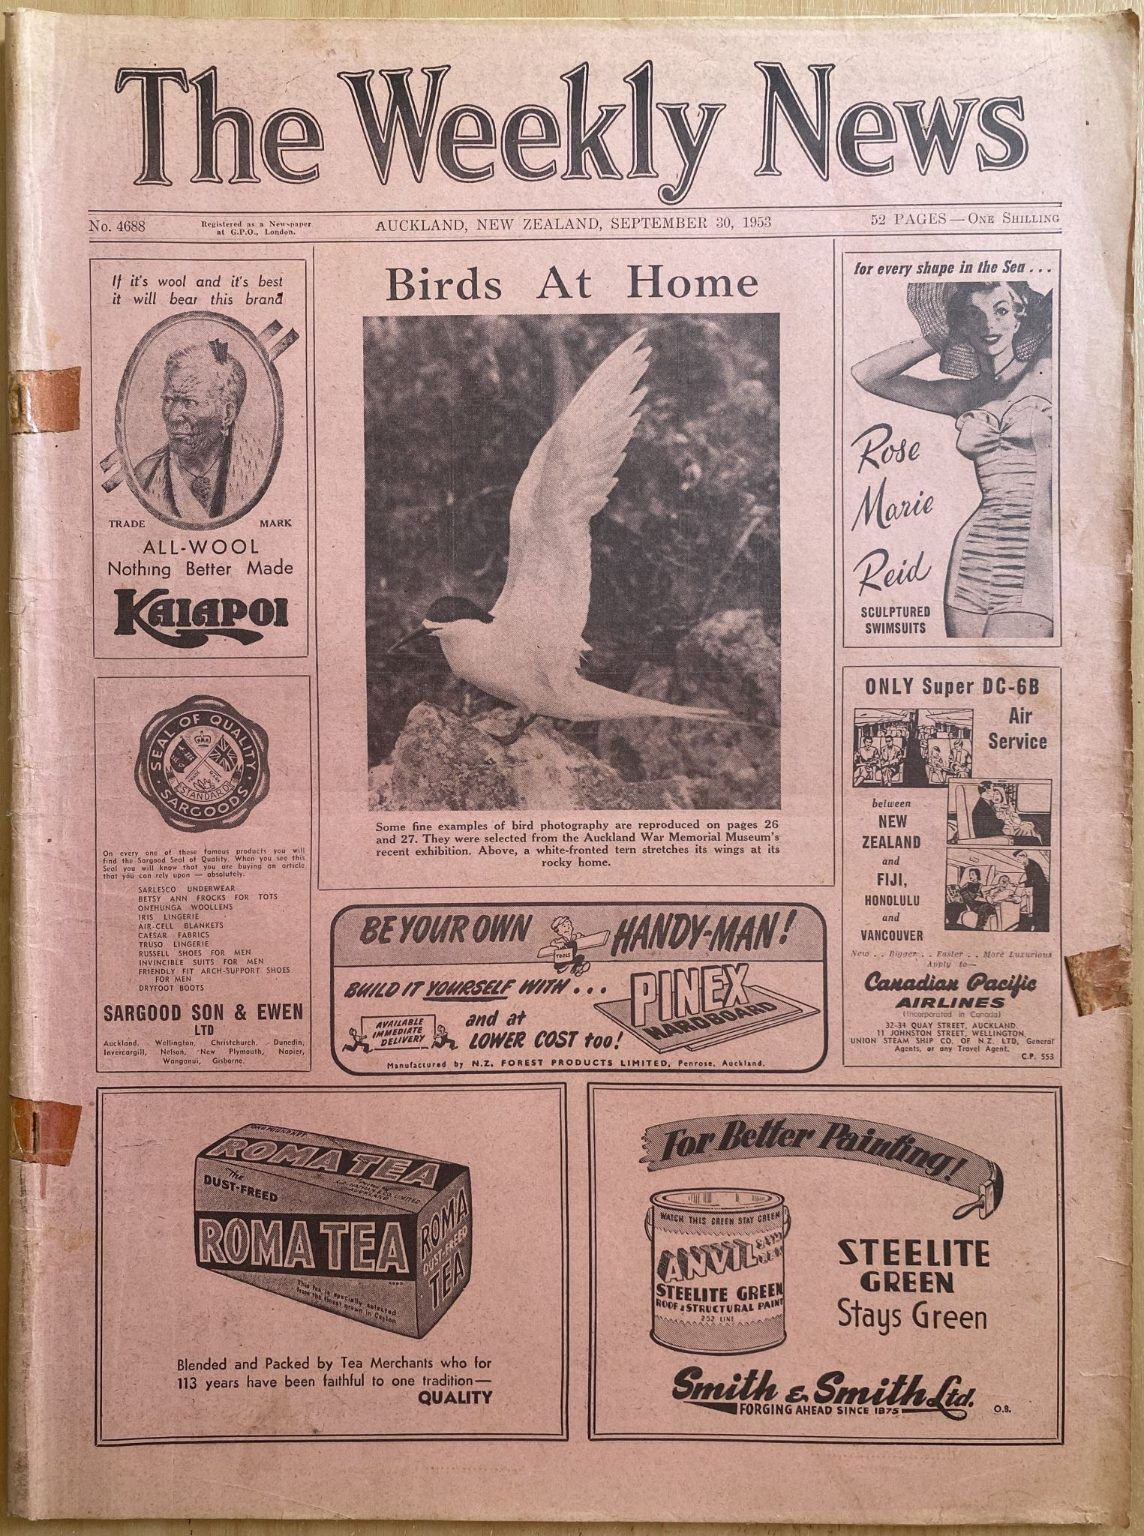 OLD NEWSPAPER: The Weekly News - No. 4688, 30 September 1953